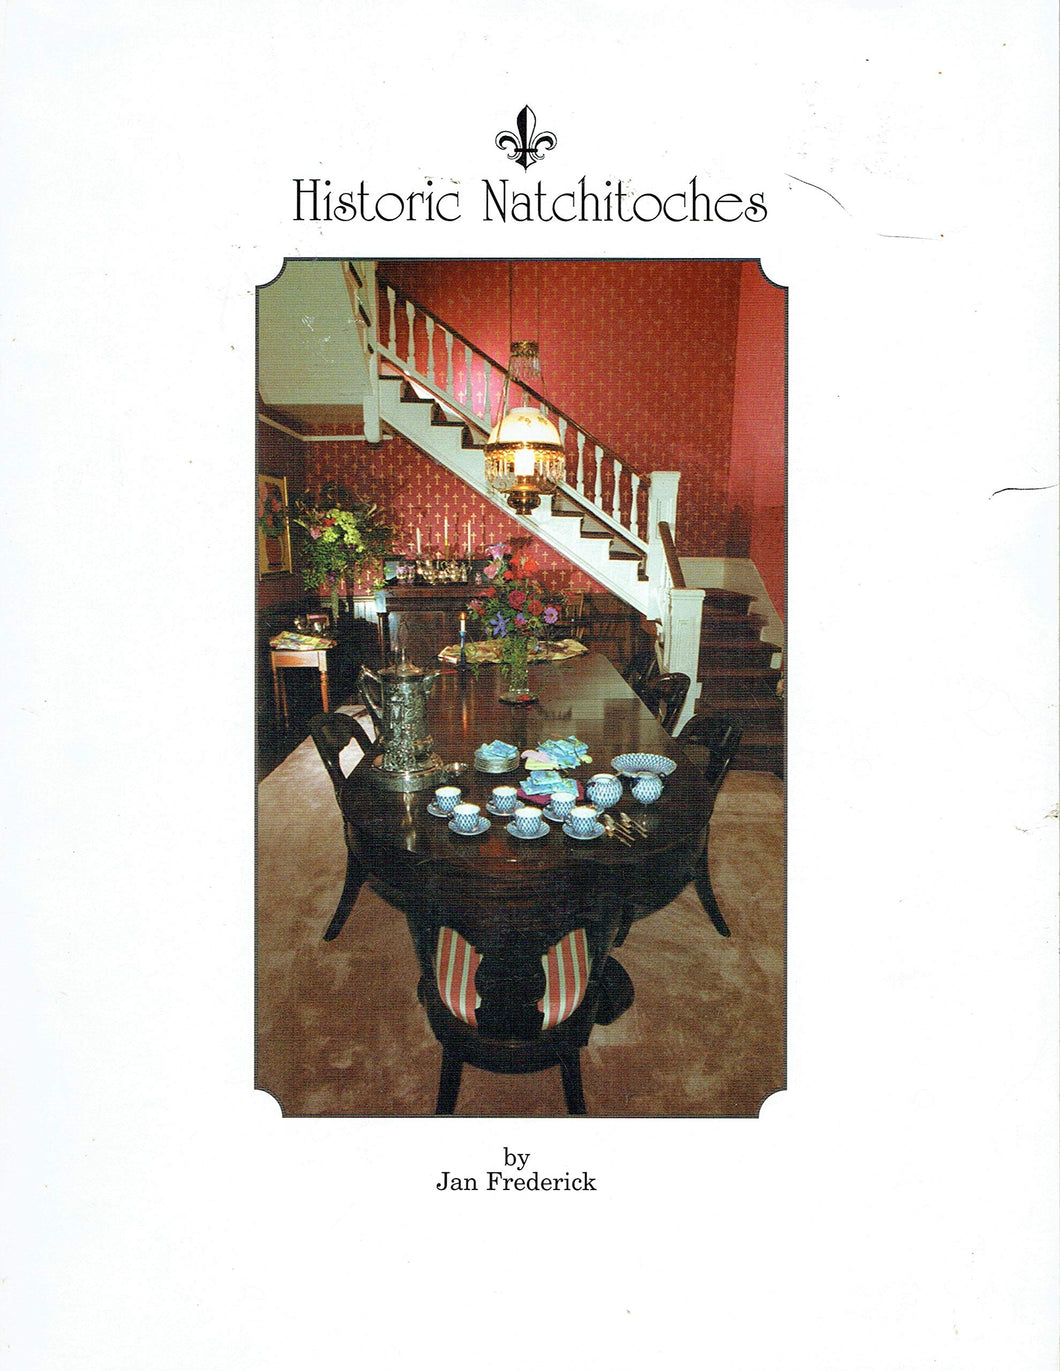 Historic Natchitoches: A photographic survey of historic sites and houses in Natchitoches Parish